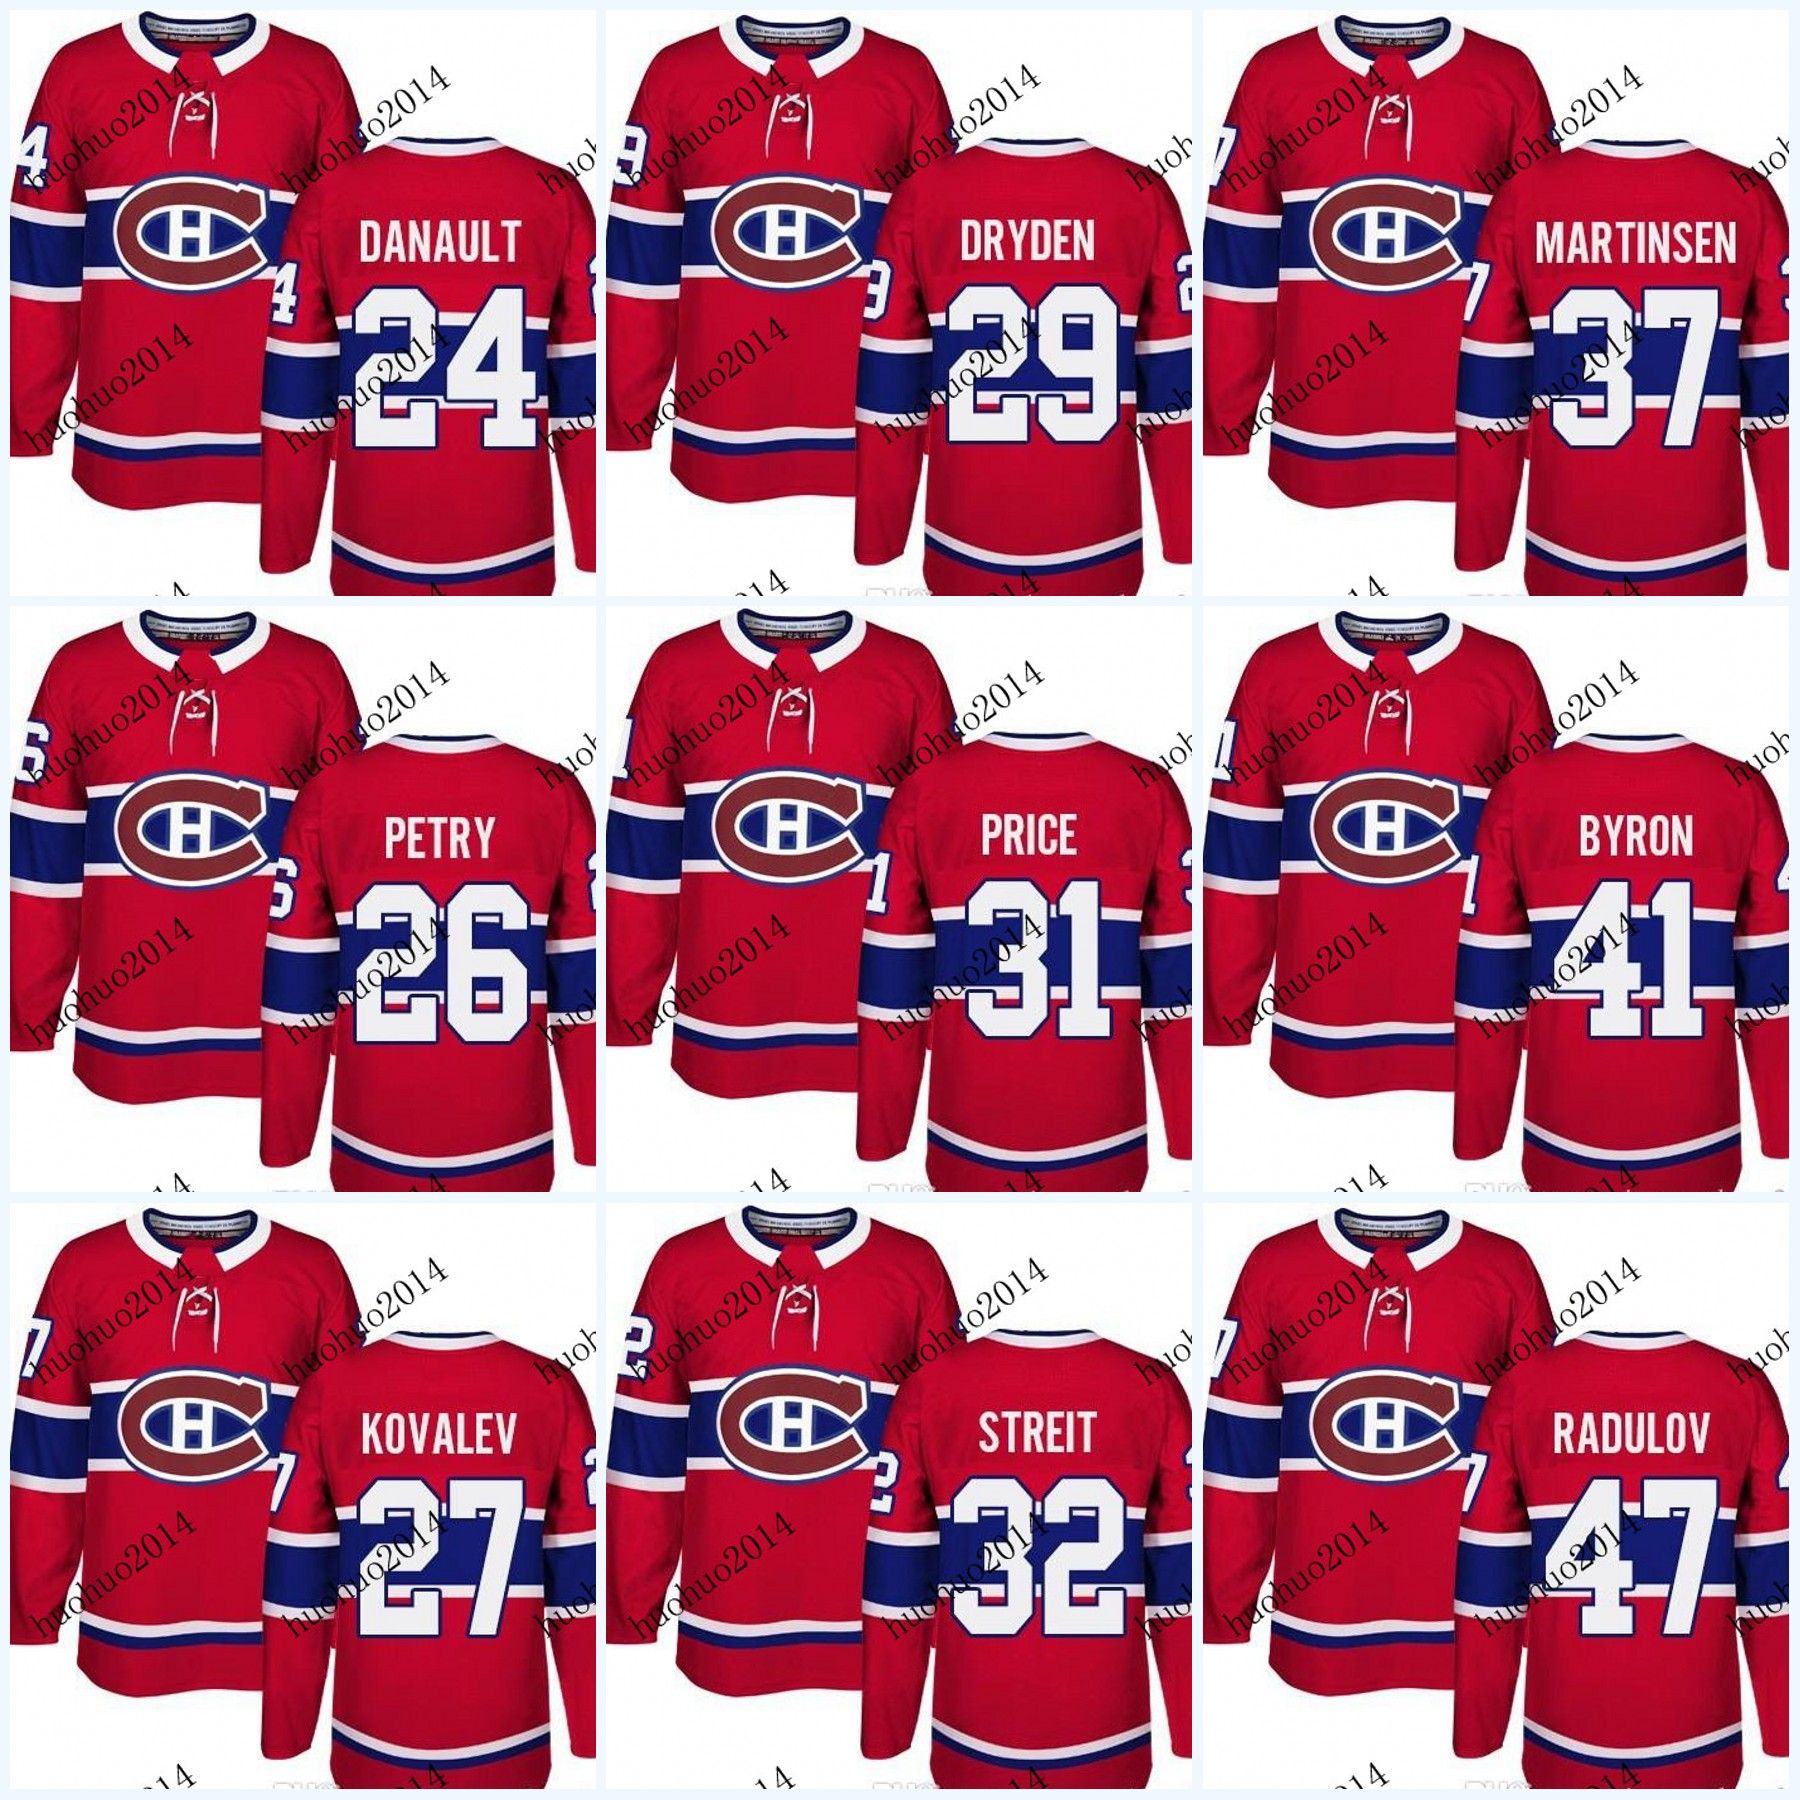 montreal canadiens youth jersey canada